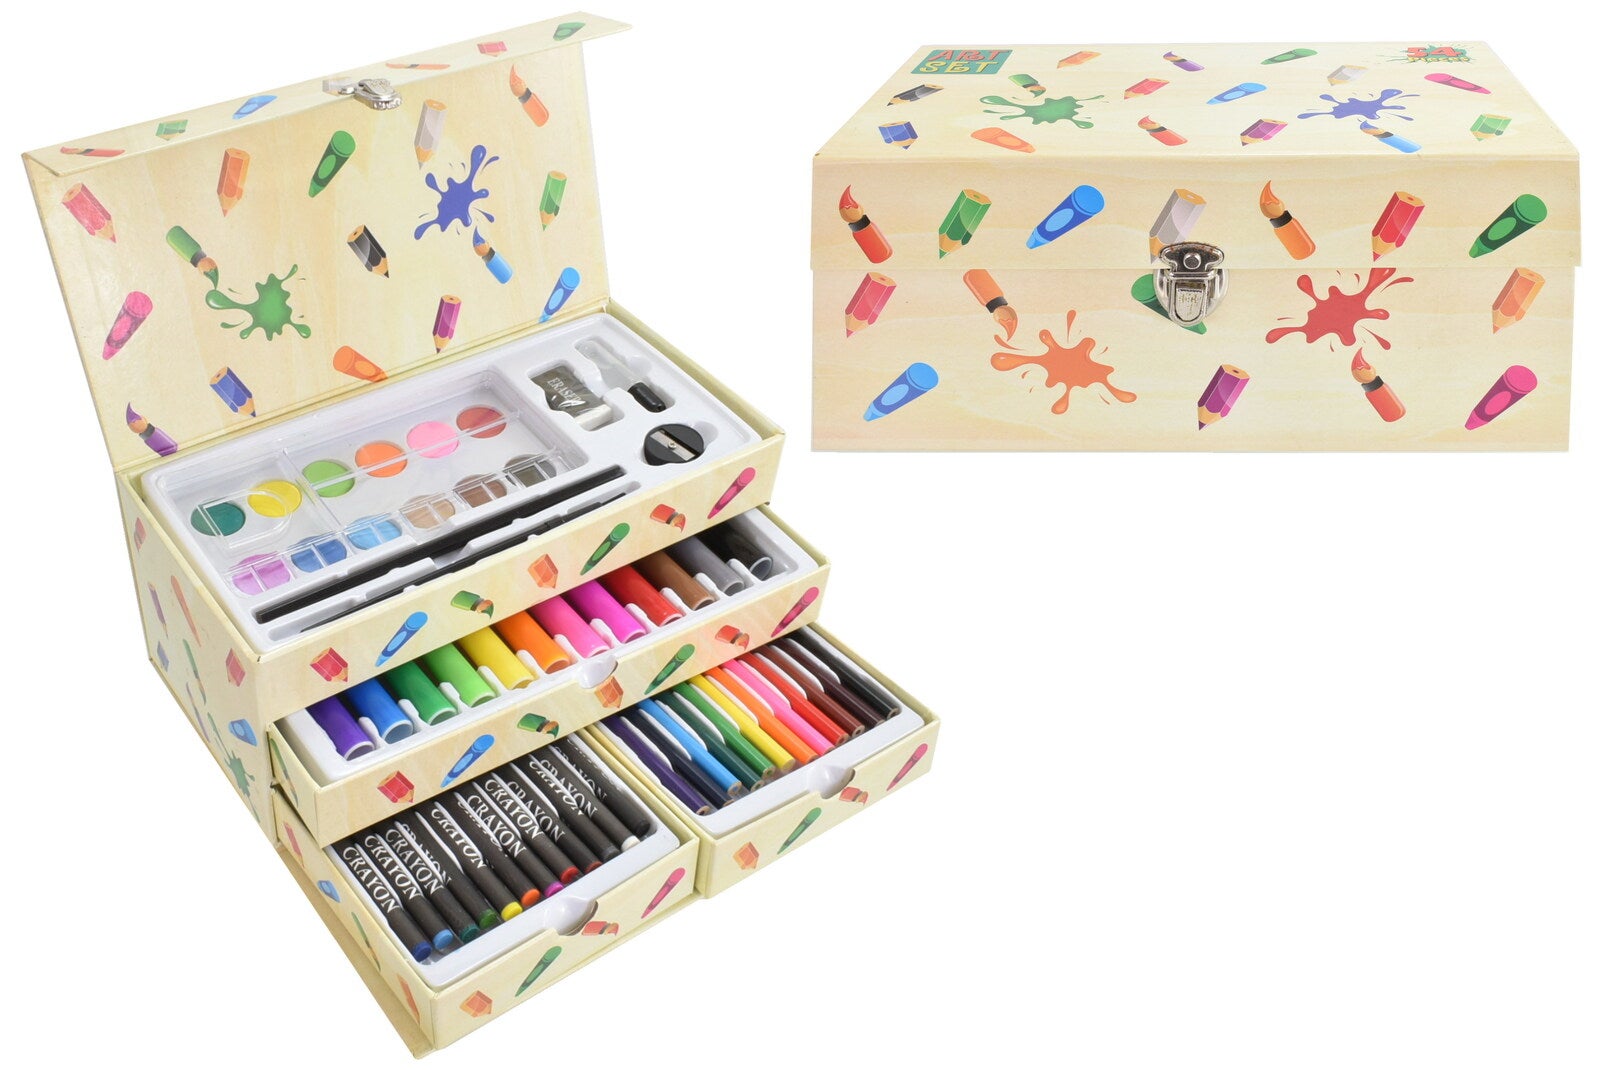 54pc Art Set In Carry Box With Drawers